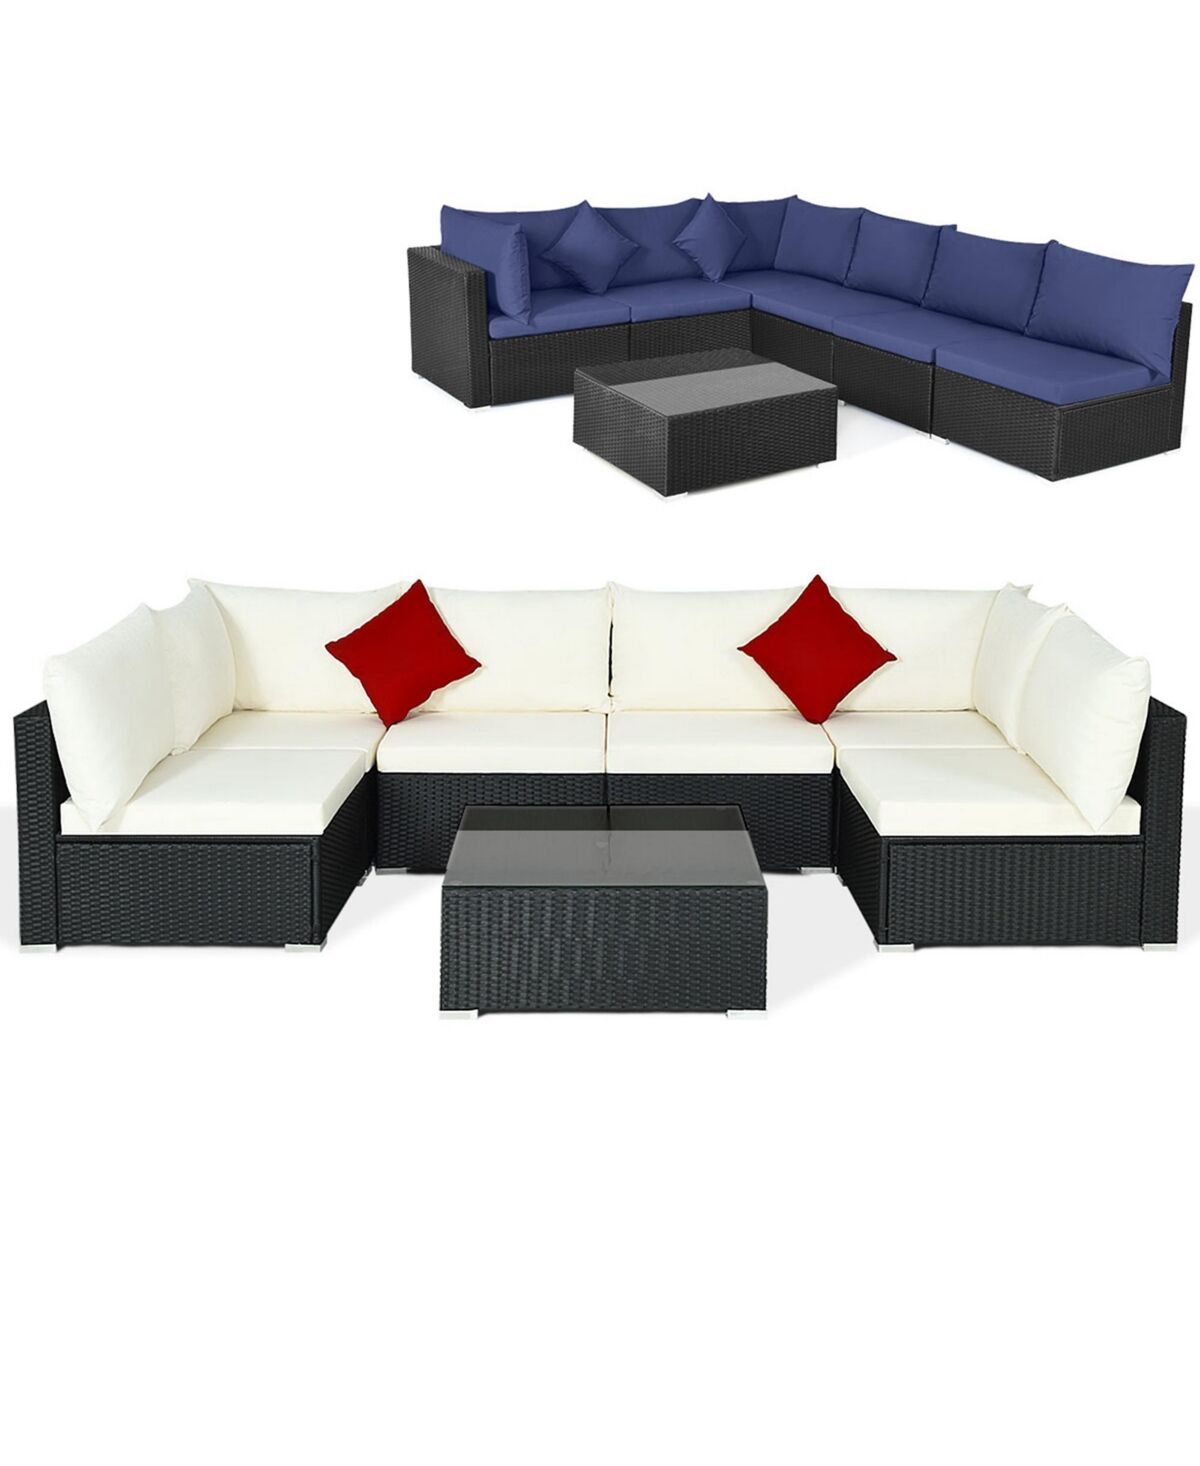 Costway 7PCS Patio Rattan Furniture Set Sectional Sofas Cushion Covers - Navy